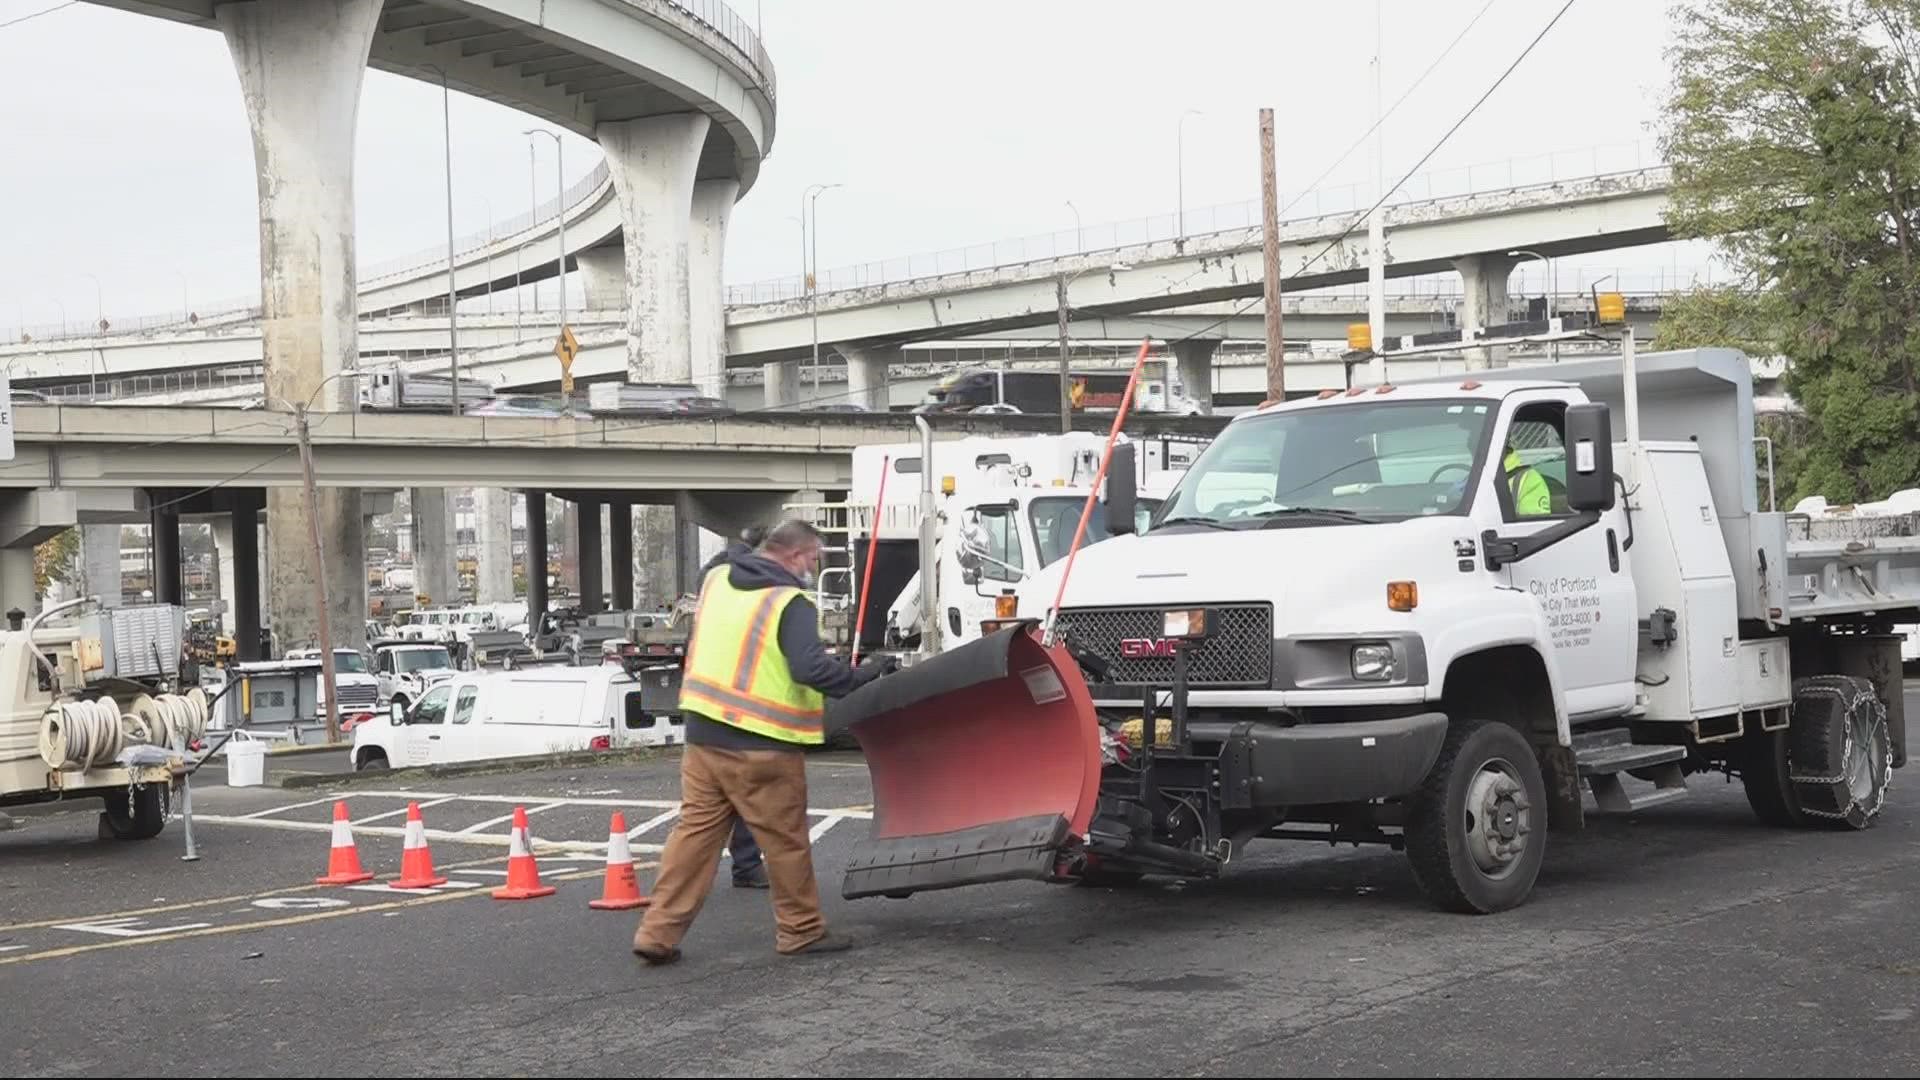 Crews with the Portland Bureau of Transportation are ready for possible snow and ice this winter. KGW's Bryant Clerkley got a look at winter weather preparations.